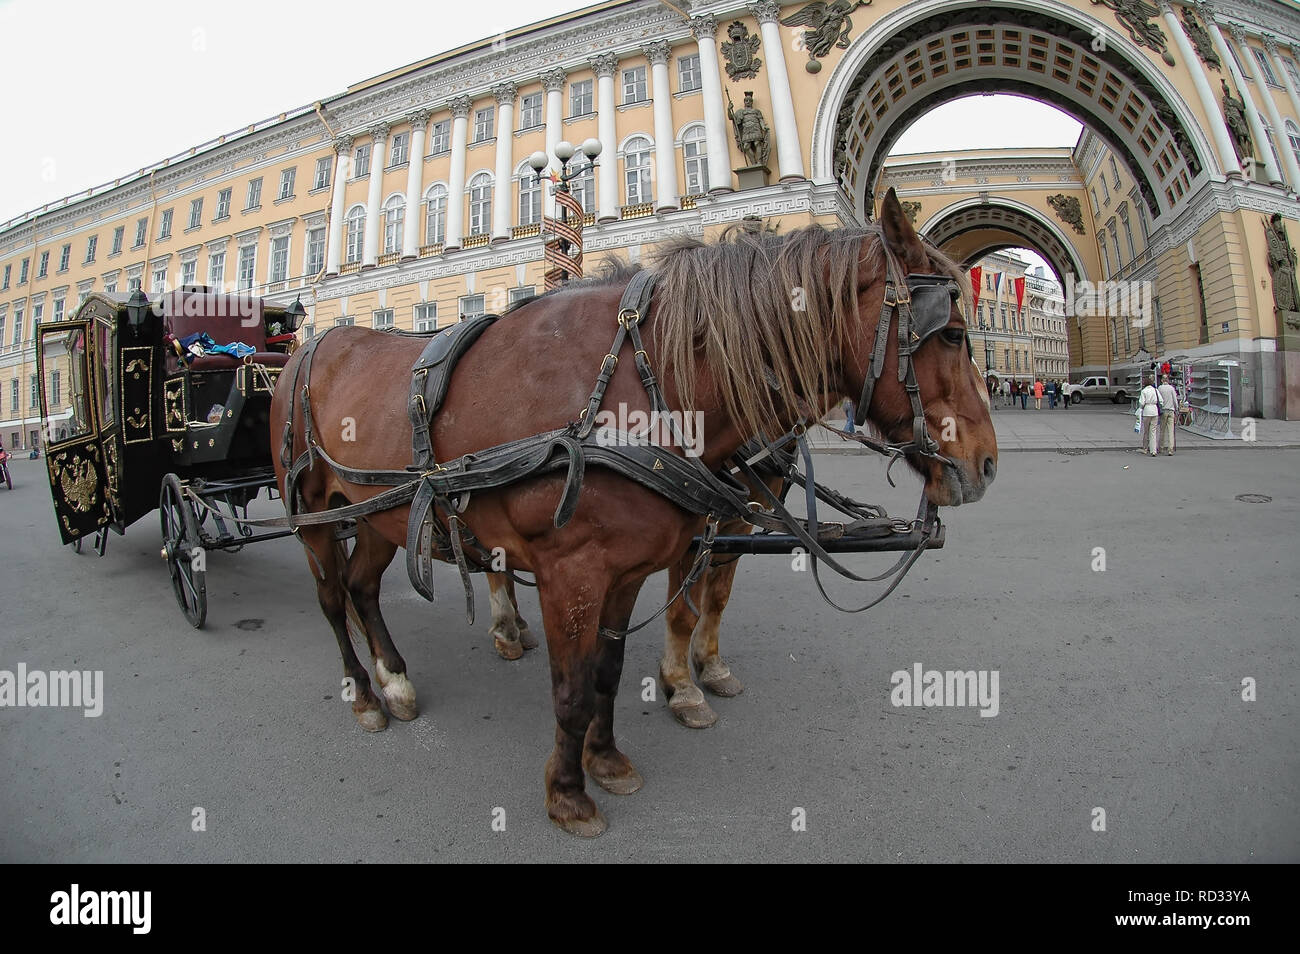 Saint-Petersburg, Russia - May 13, 2006: Crew with horses near Arch of General Staff Building and Hermitage Stock Photo